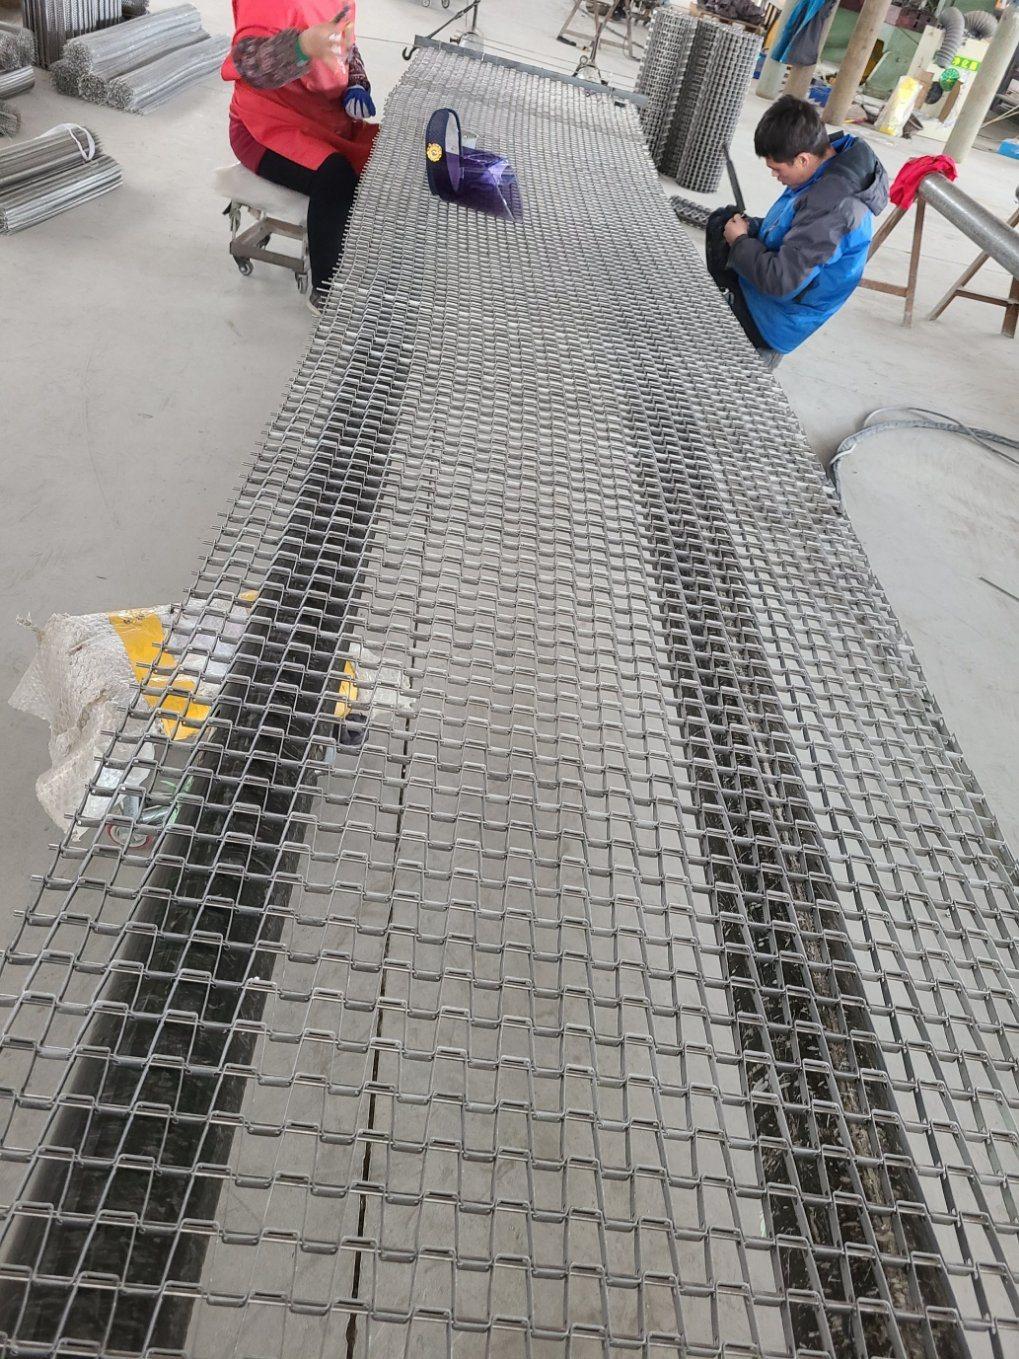 Metal Stainless Steel Perforated Chain Link Wire Mesh Conveyor Belts with Chain